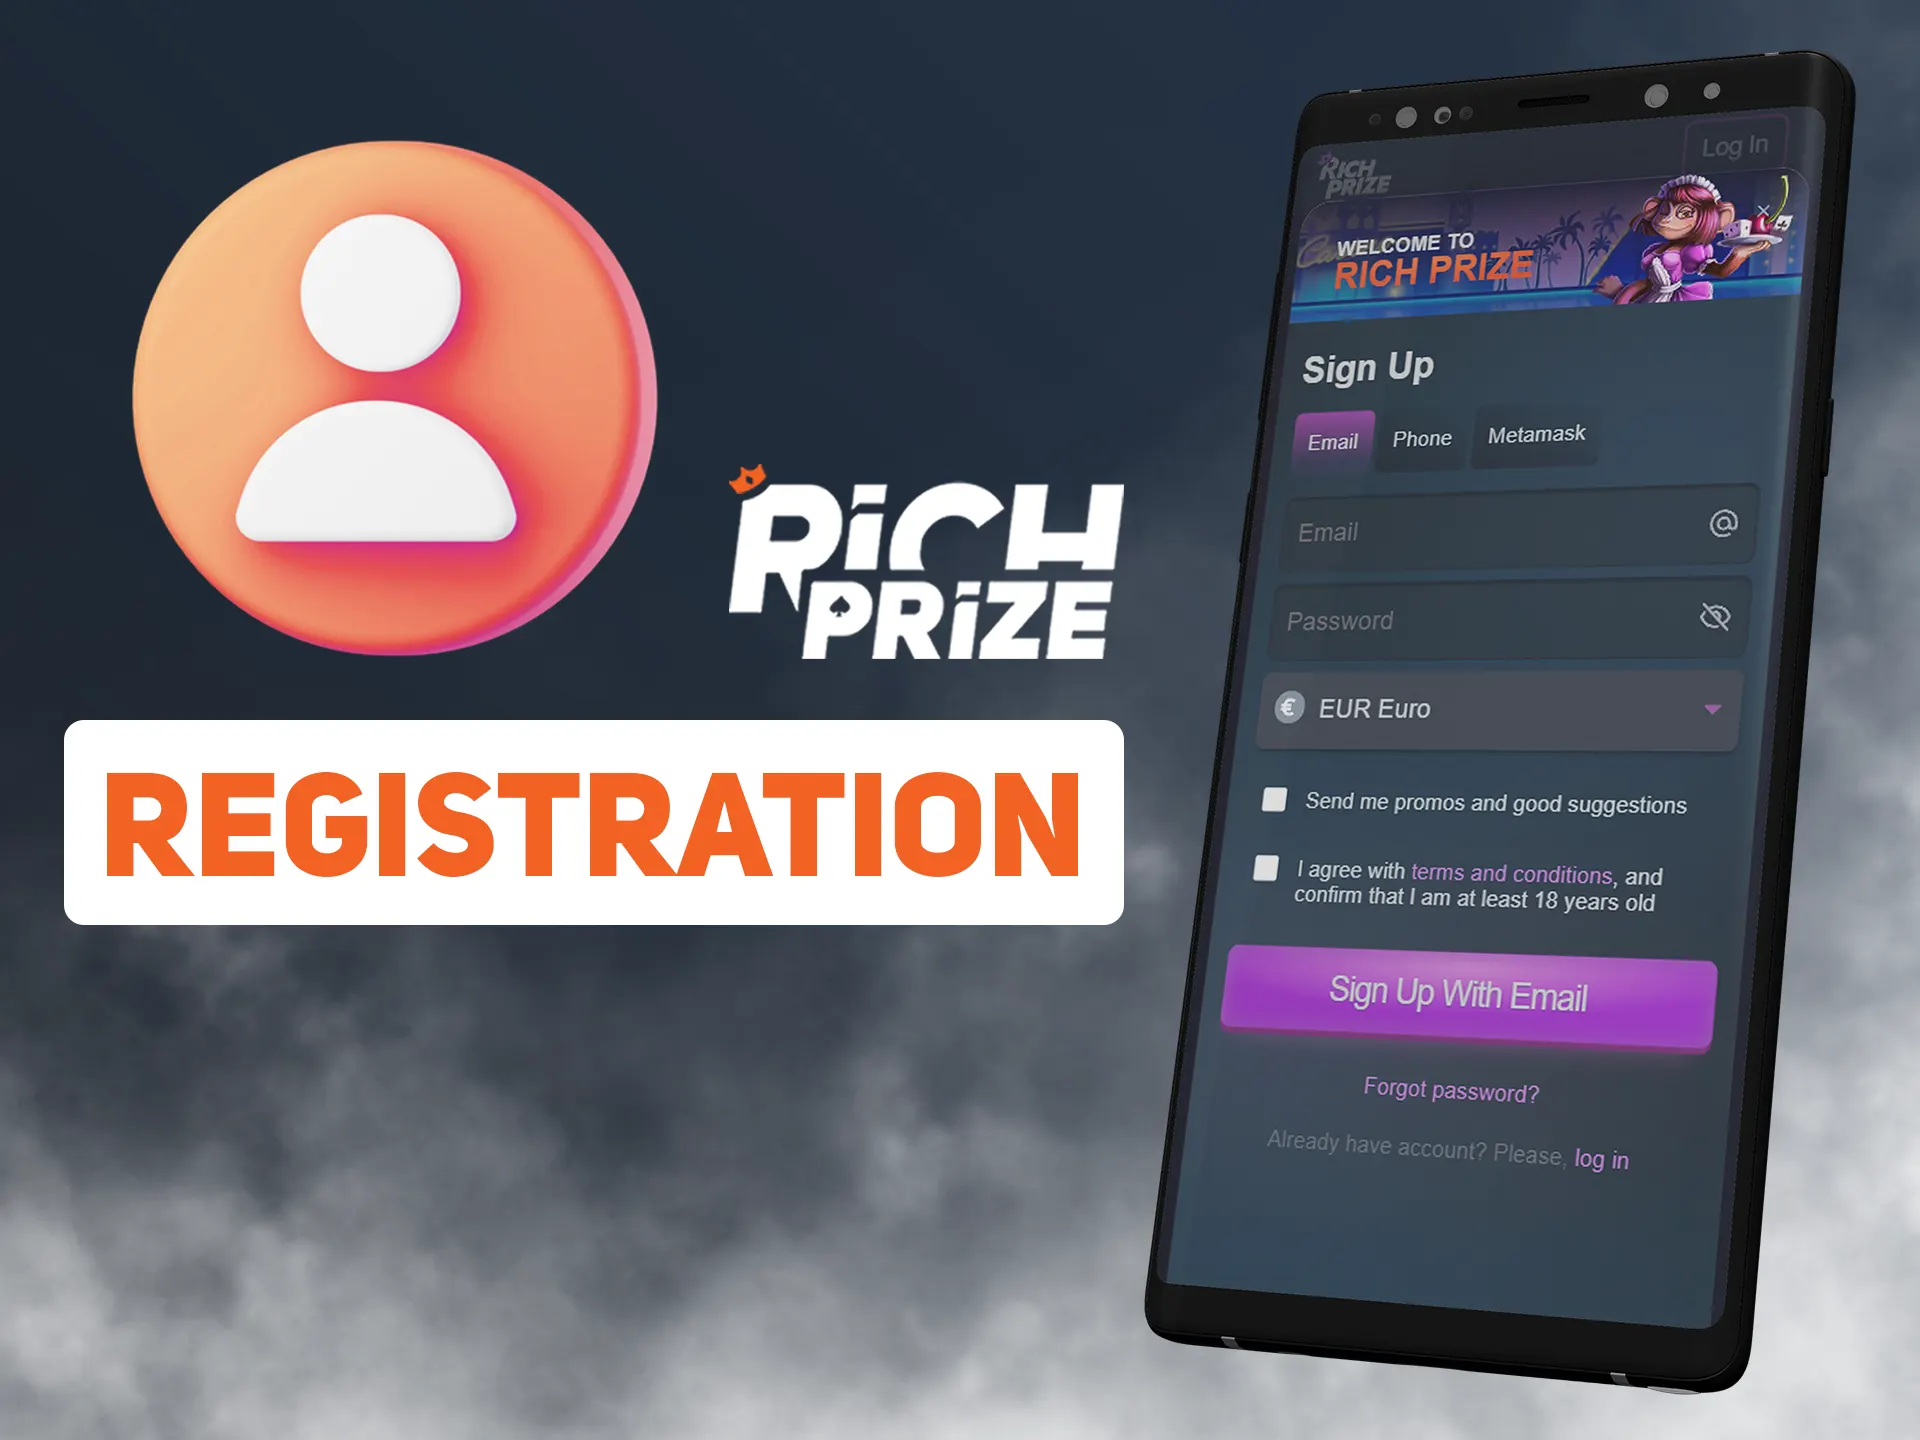 Register new Richprize account by clicking on registration button.